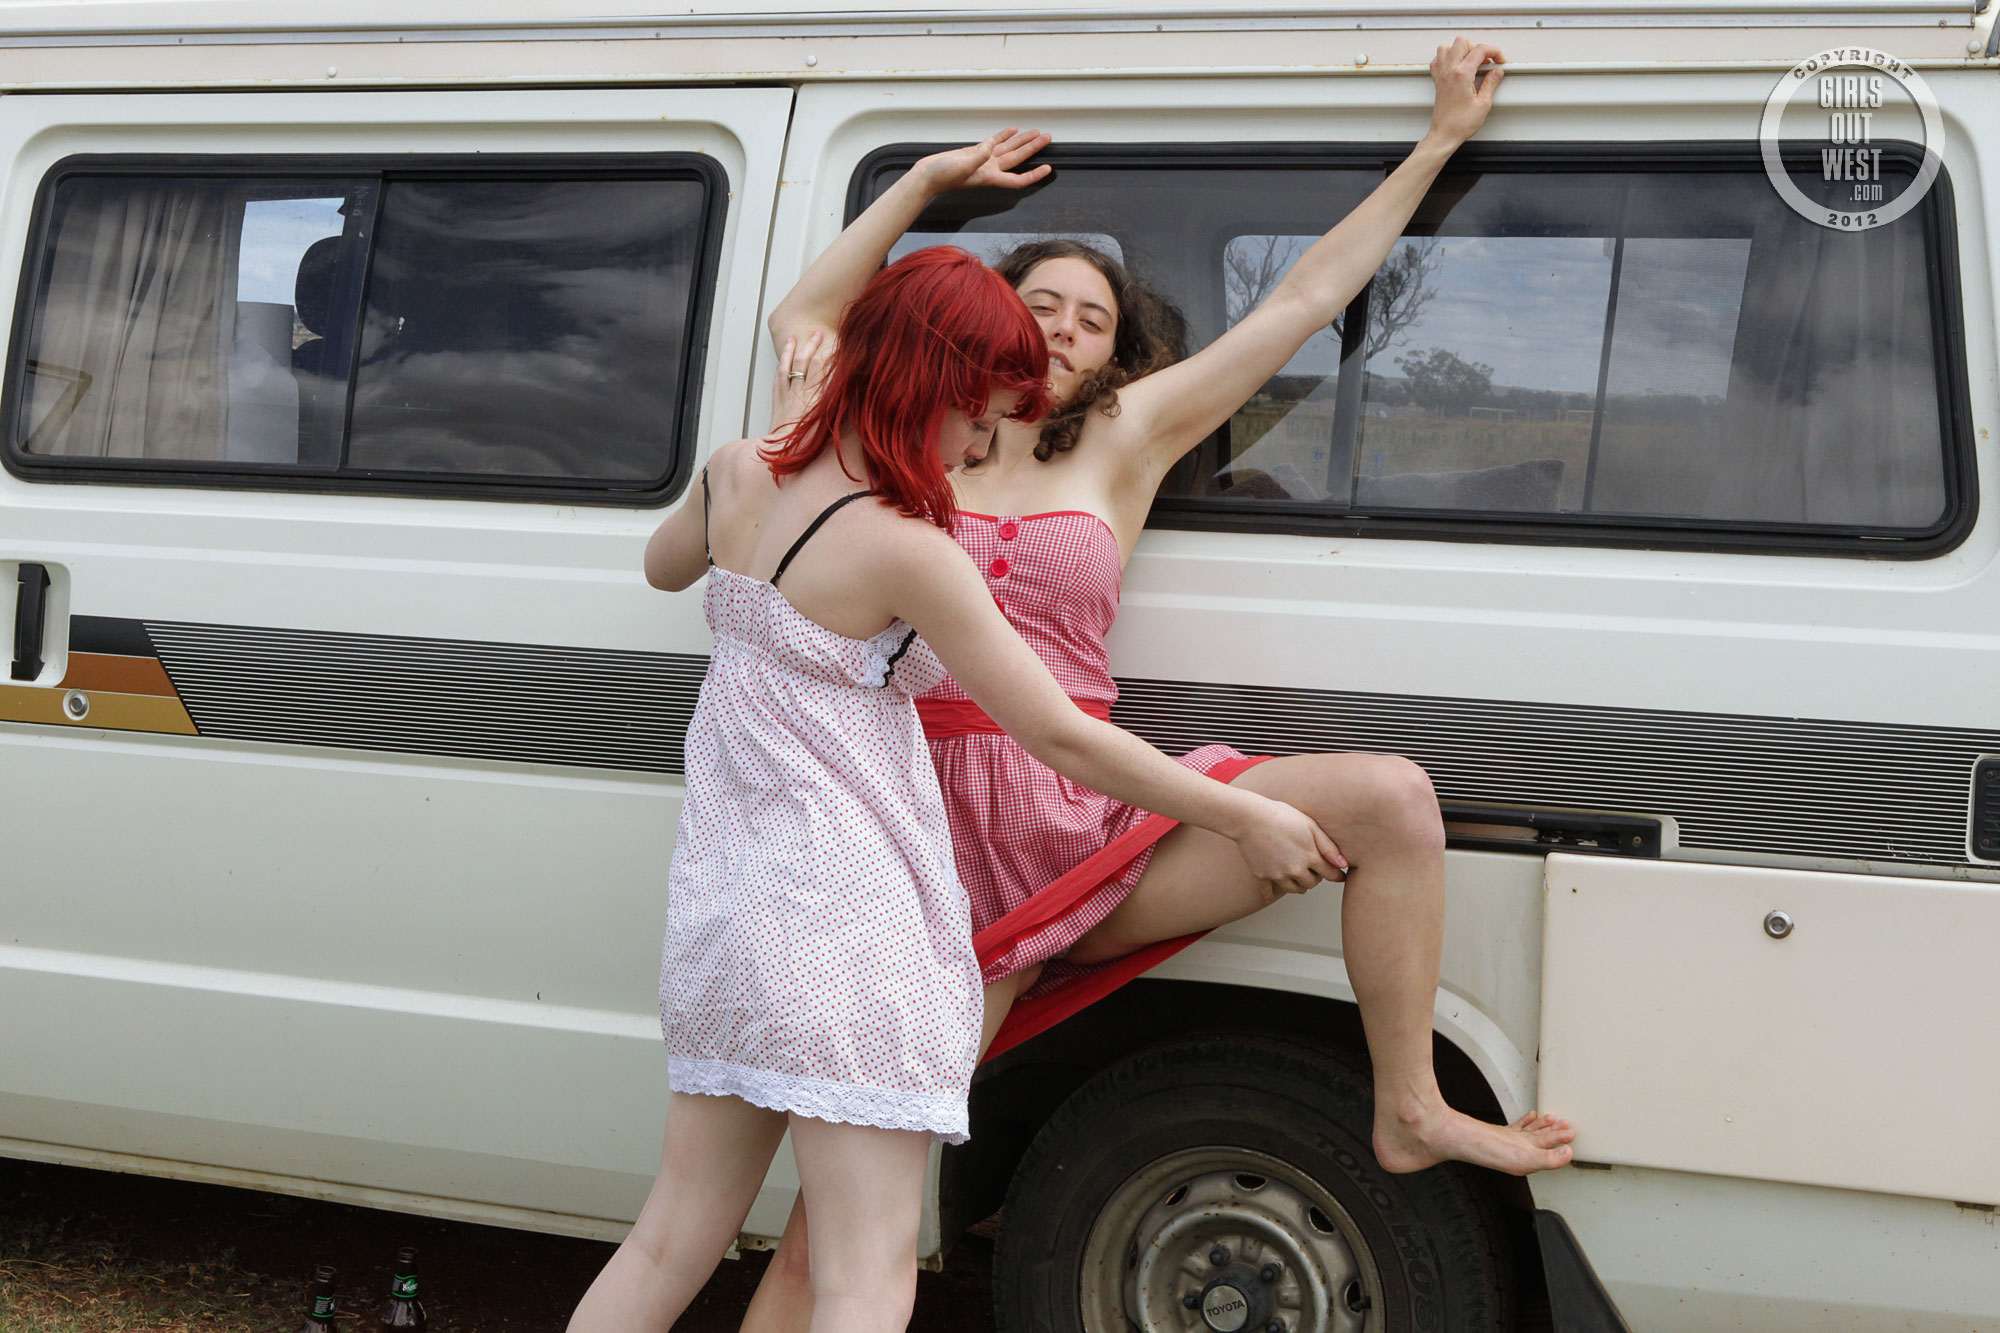 wpid-lesbian-lovers-van-camping-and-fingering-each-other-outdoors5.jpg